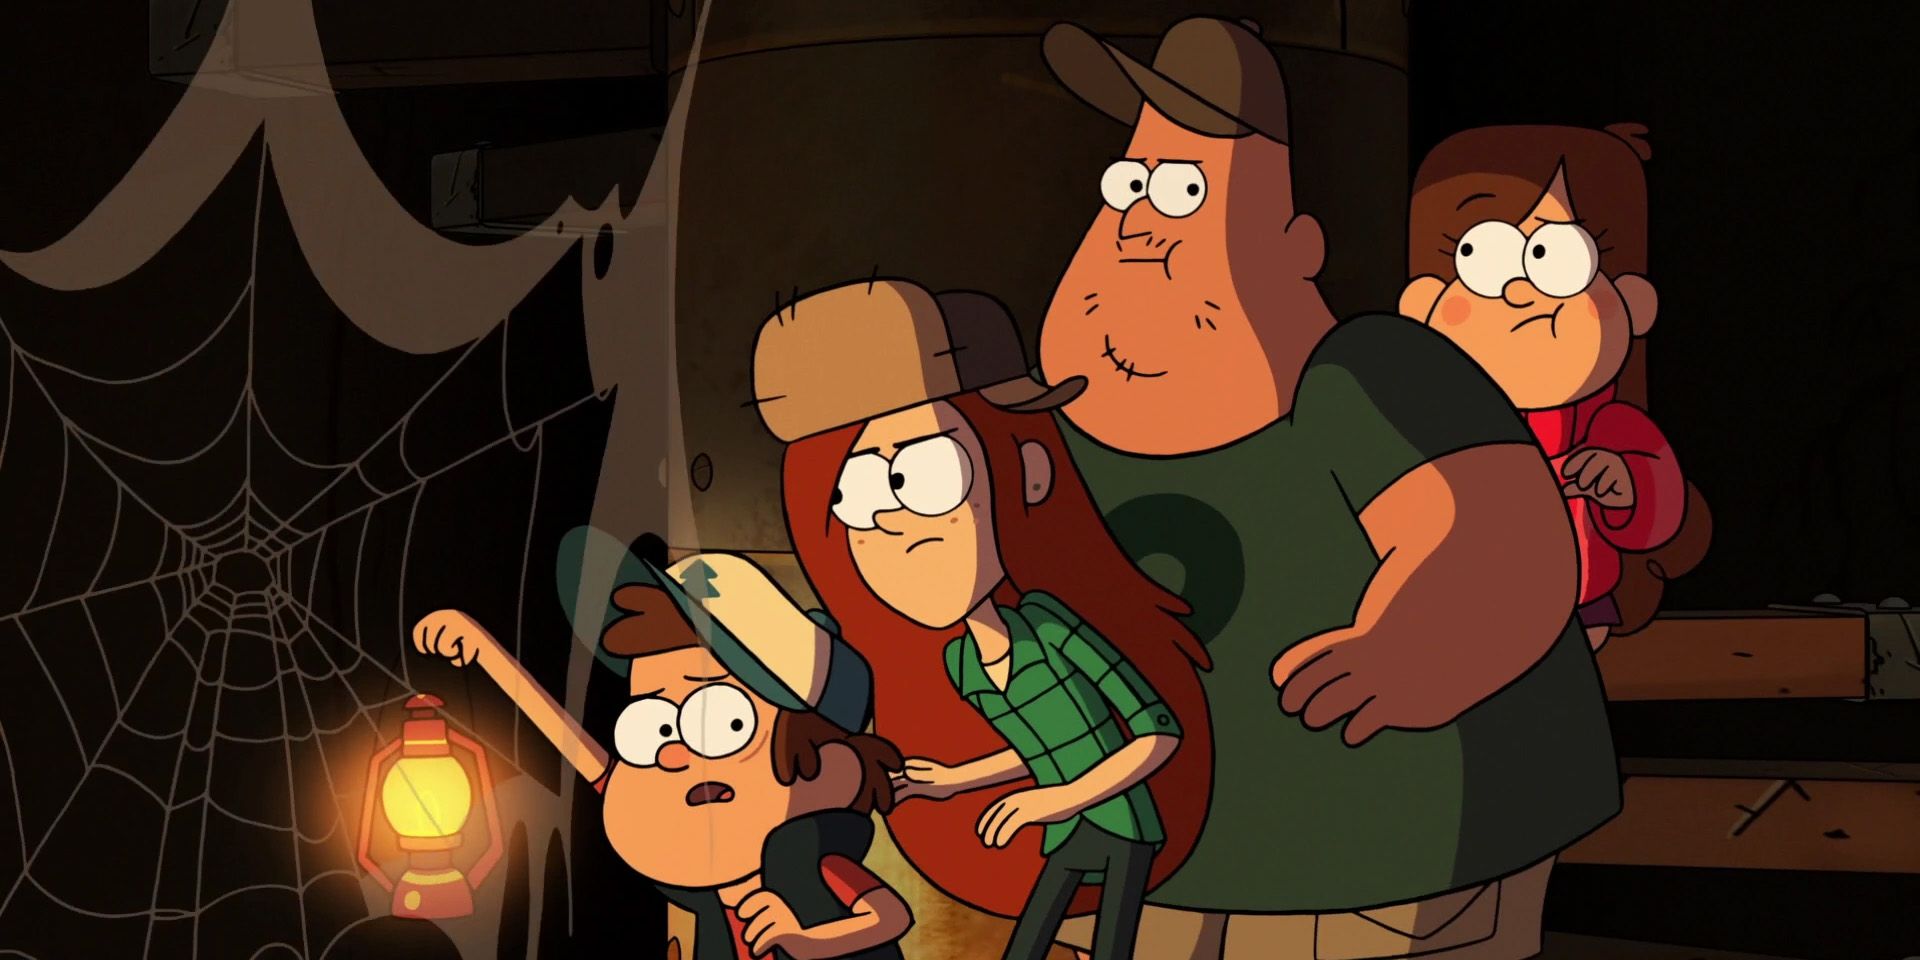 10 Darkest Episodes Of Gravity Falls, Ranked By How Terrifying They Are